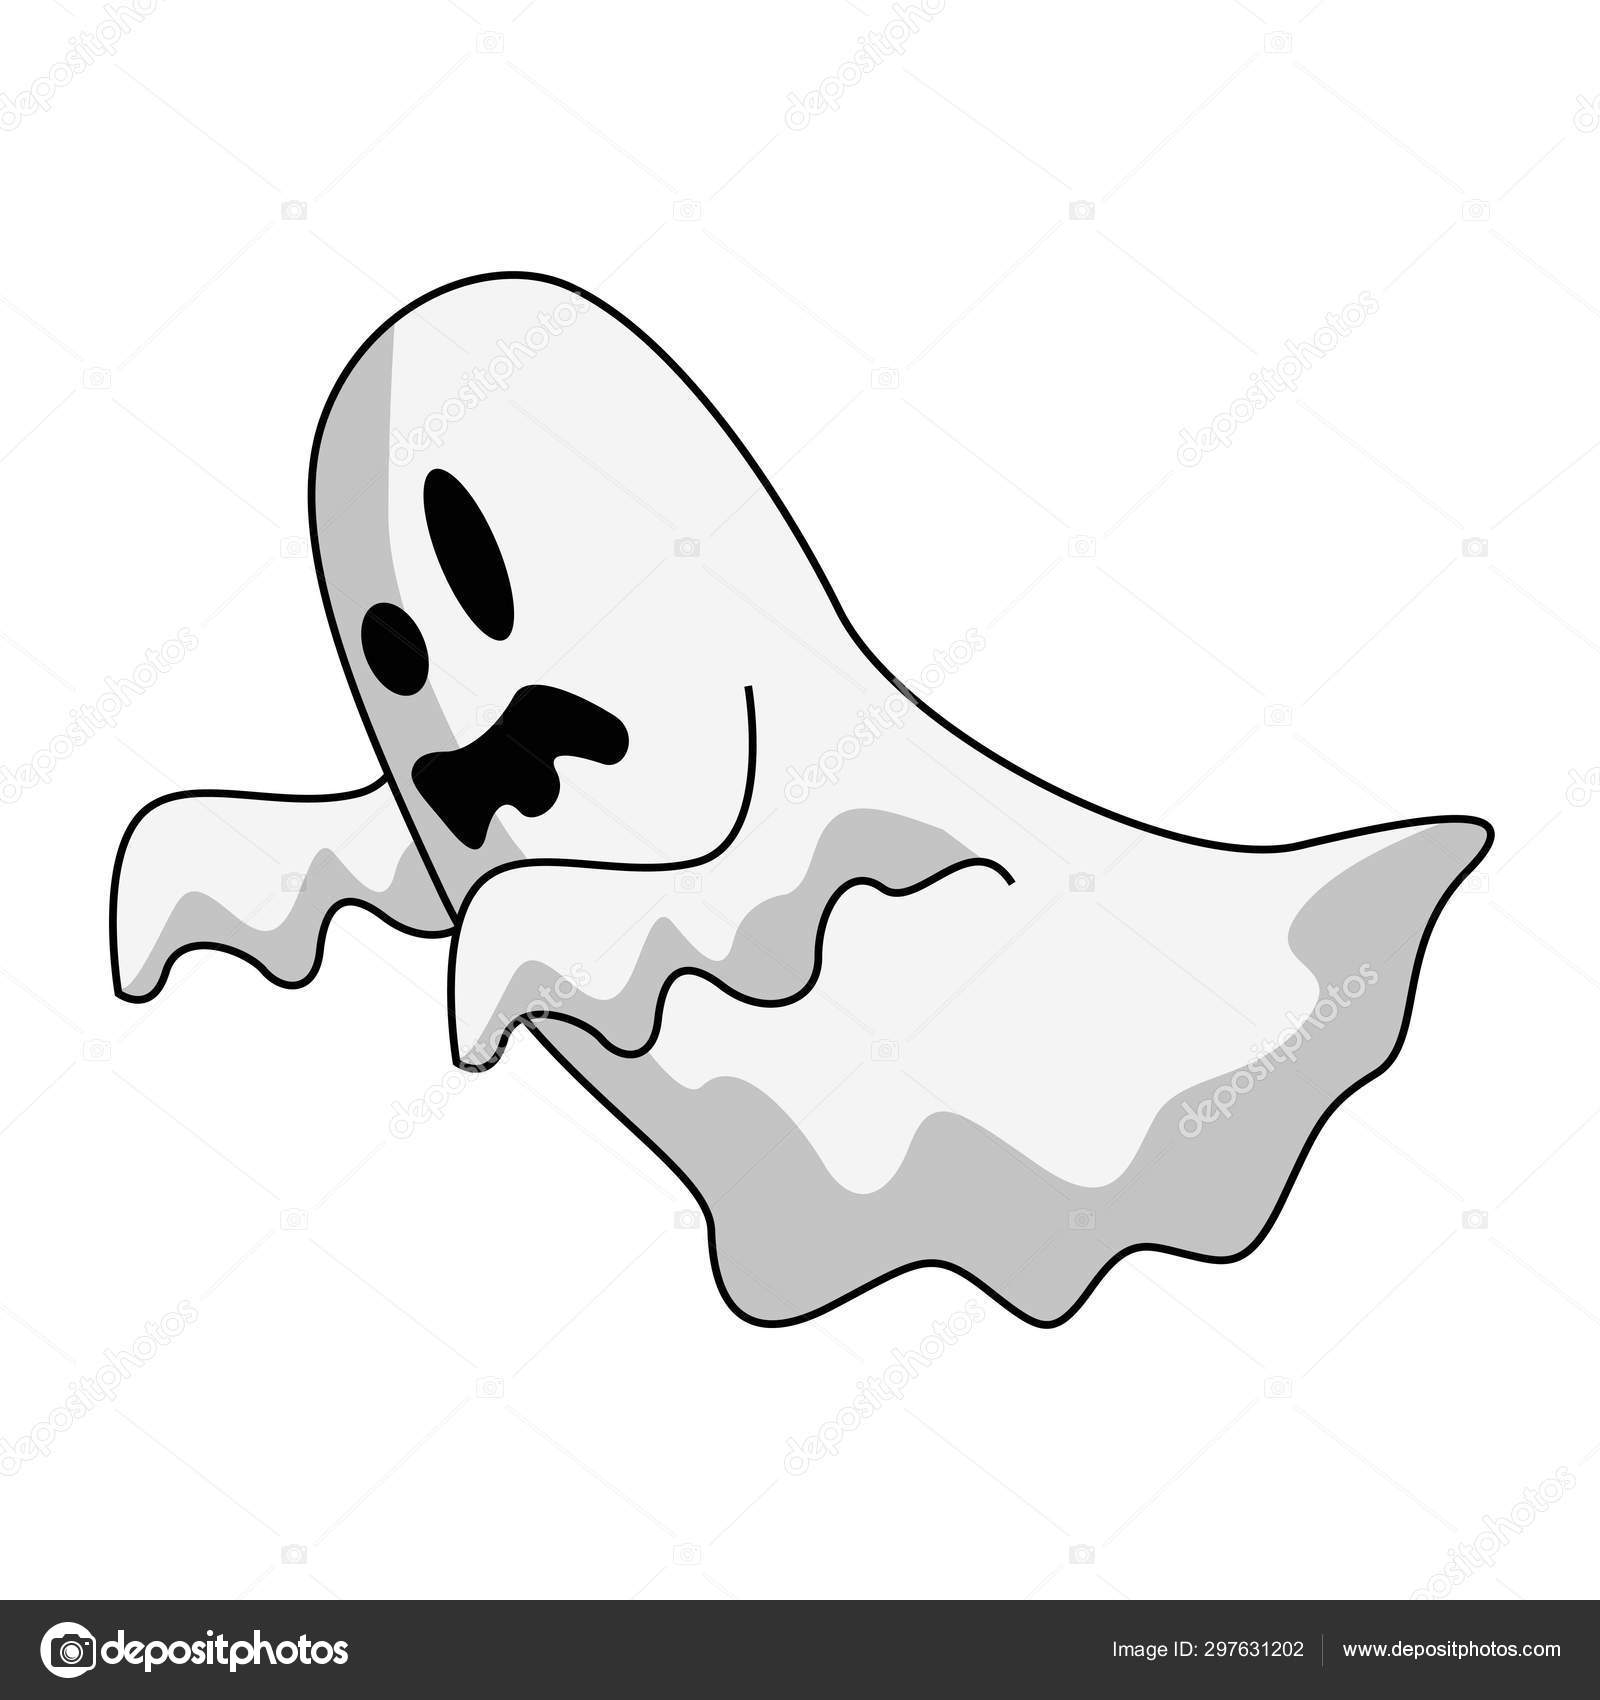 Scary Cartoon Ghost Images